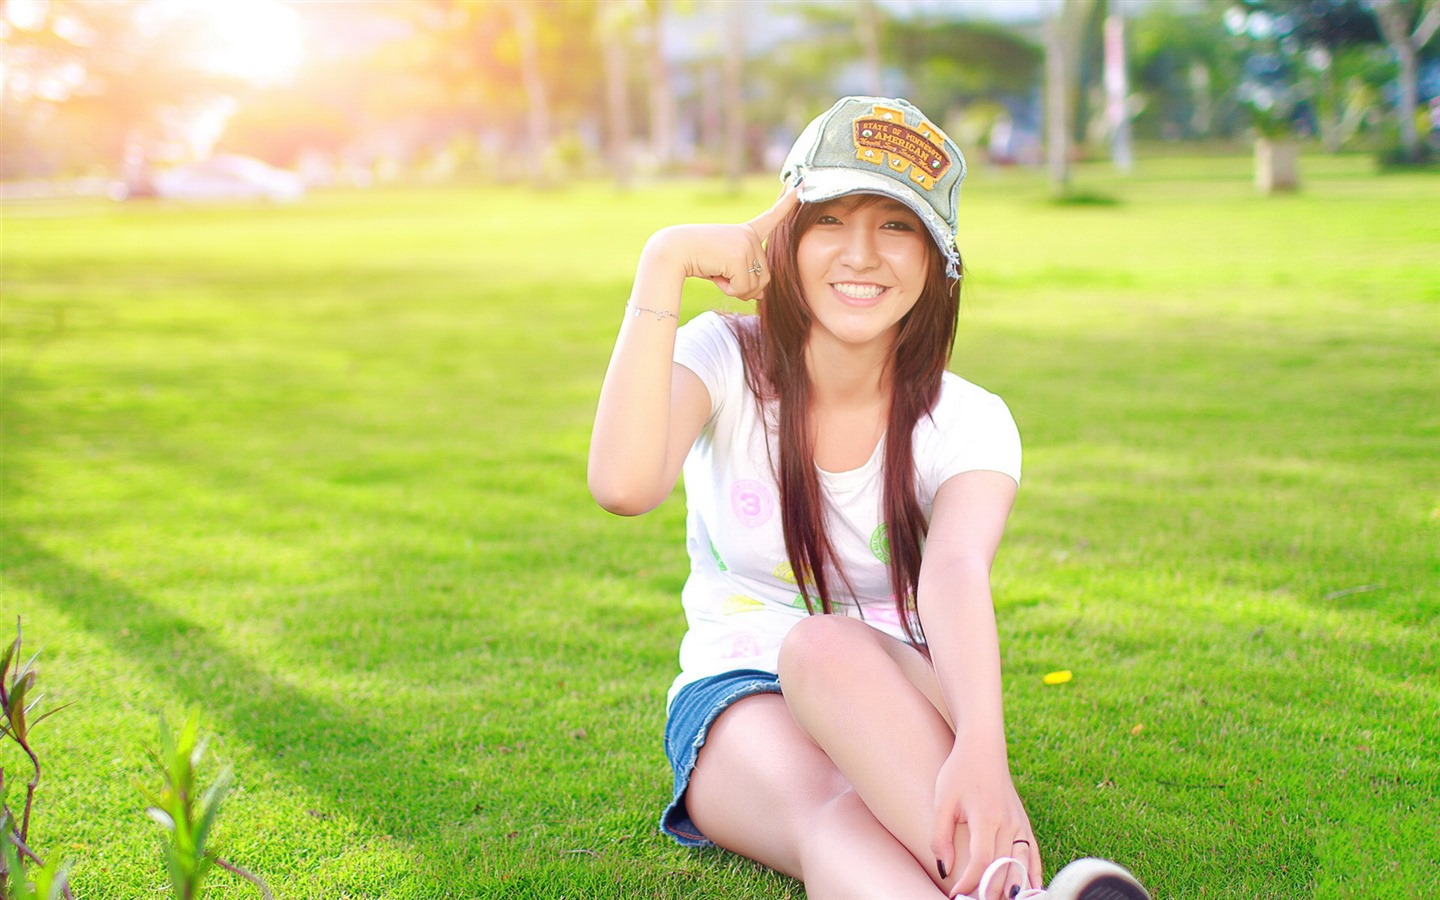 Pure and lovely young Asian girl HD wallpapers collection (5) #36 - 1440x900